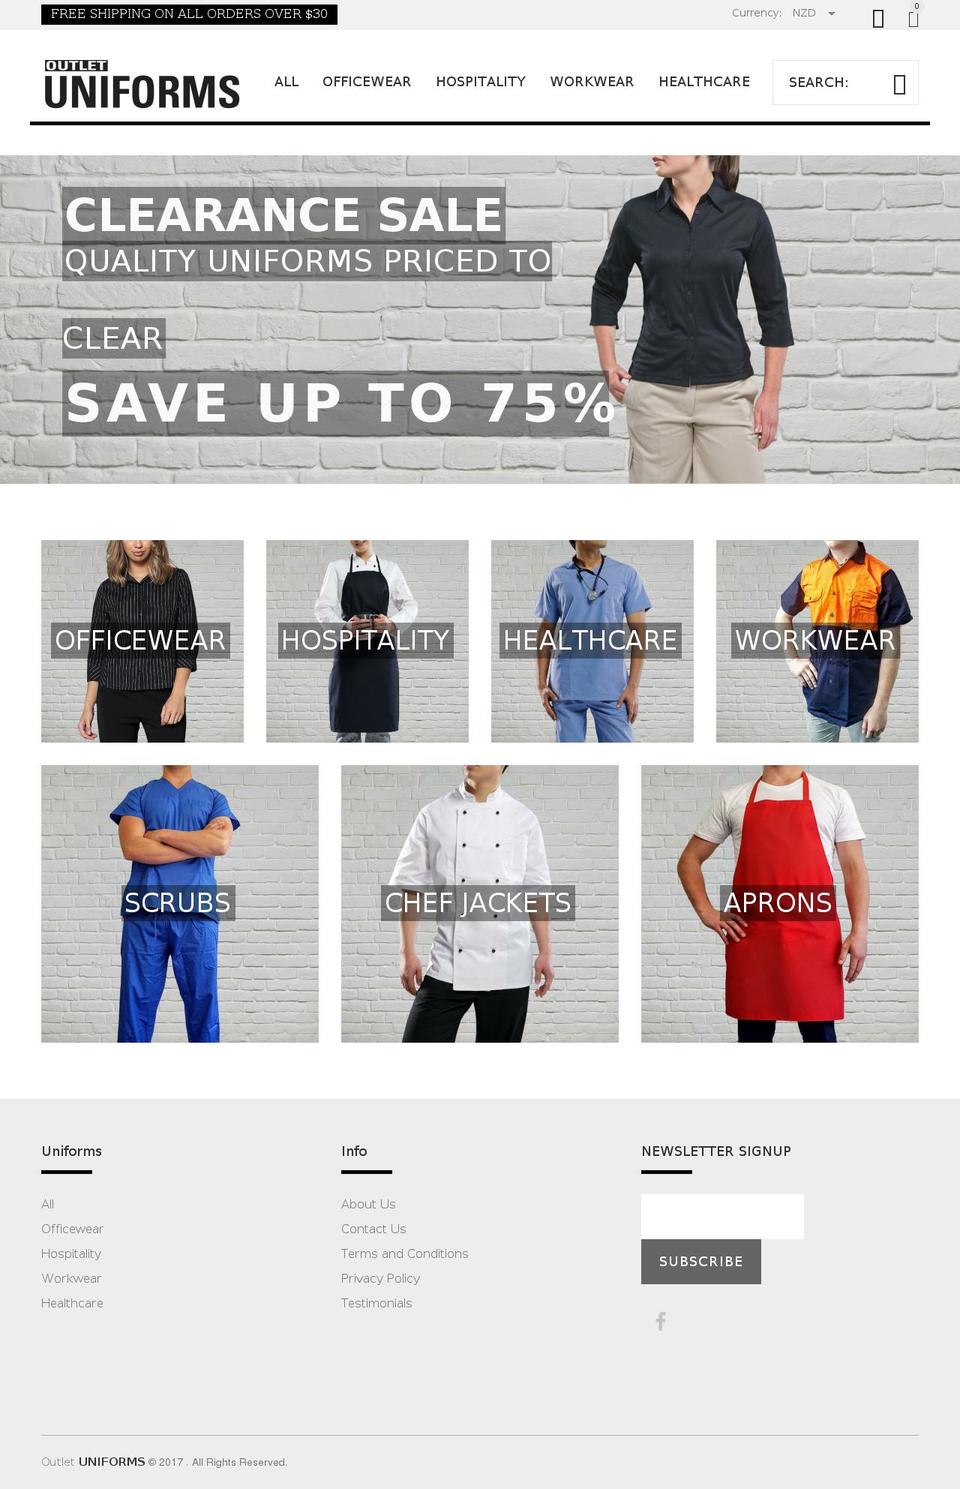 install-me-yourstore-v2-1-7 Shopify theme site example uniforms.co.nz